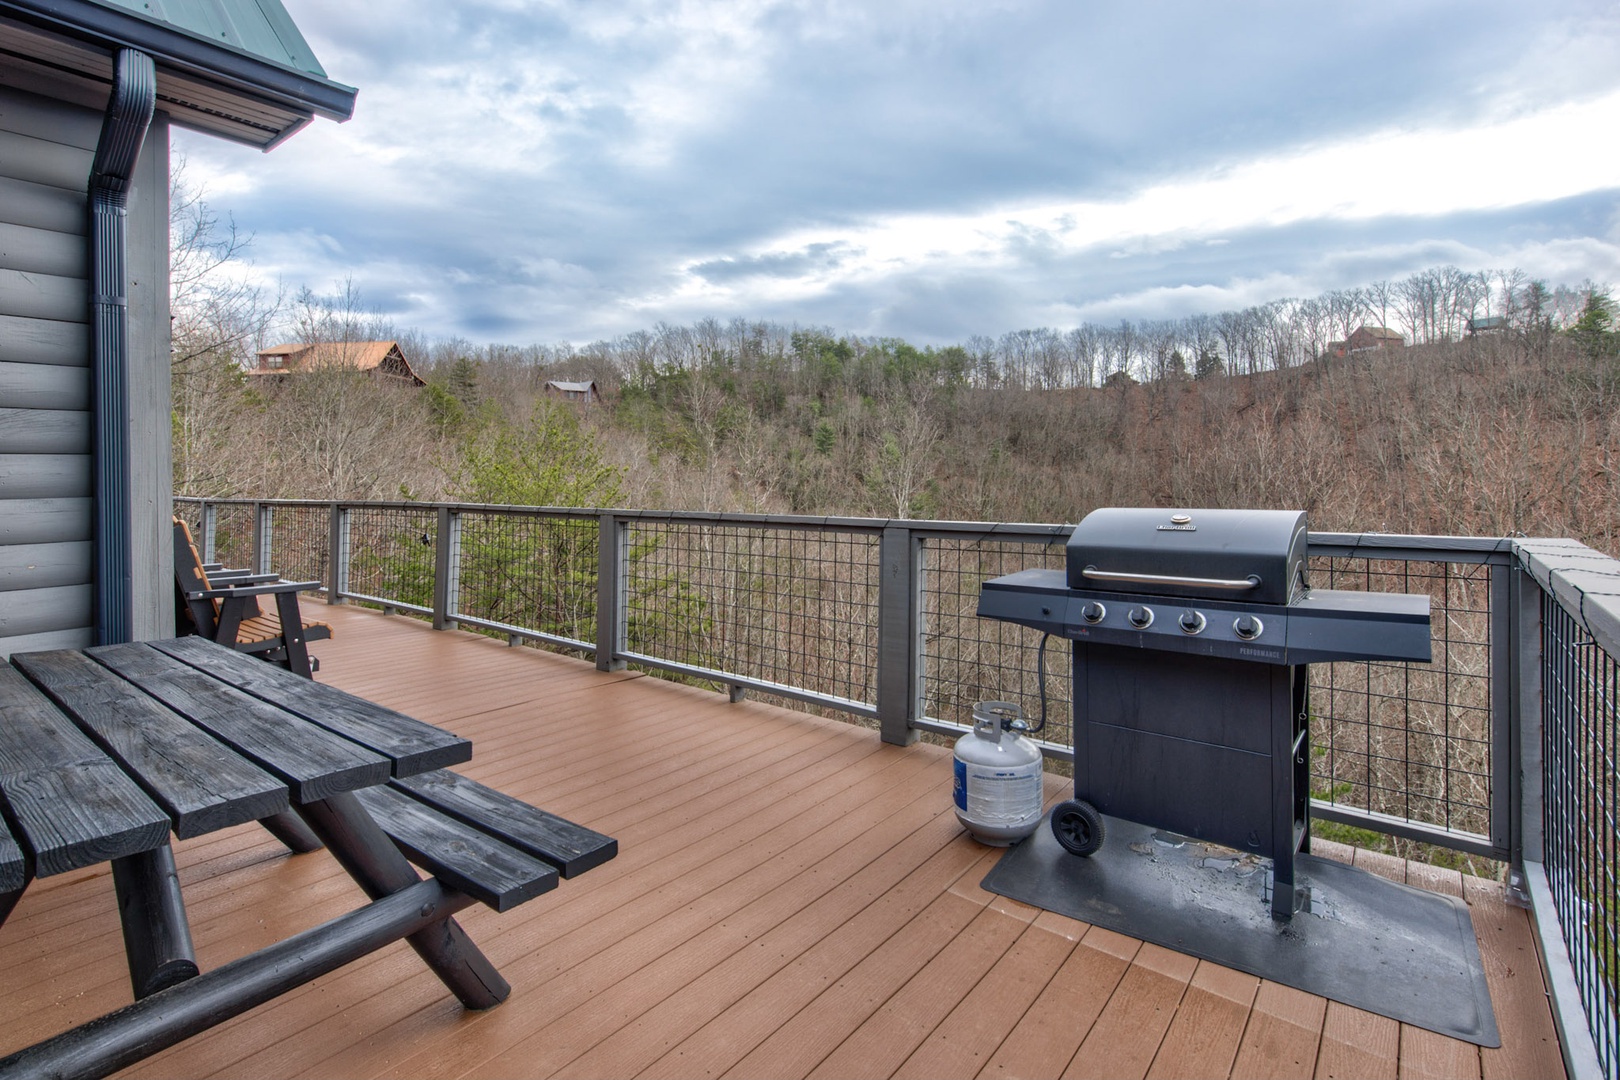 Lounge in comfort with stunning views on the deck while you grill up a feast!